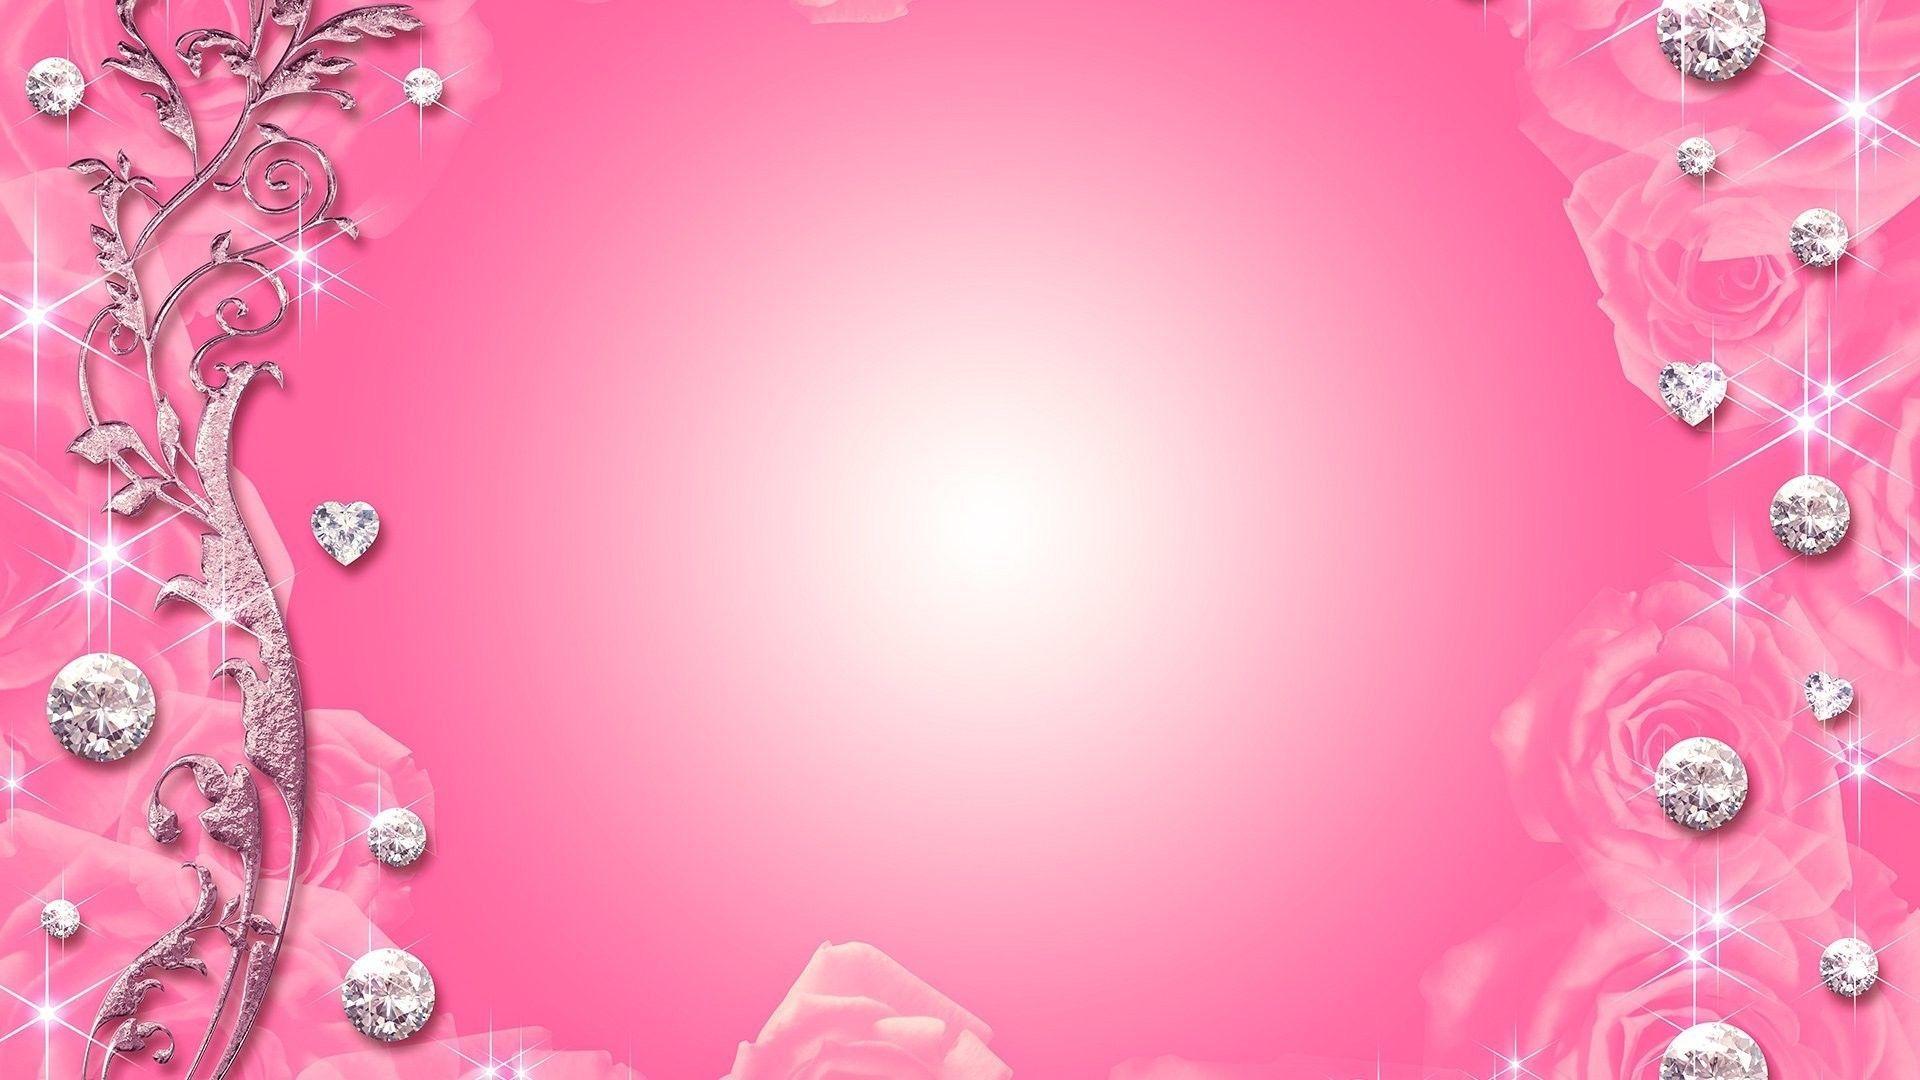 Diamond Heart Pink Frame Free PPT Background for your PowerPoint